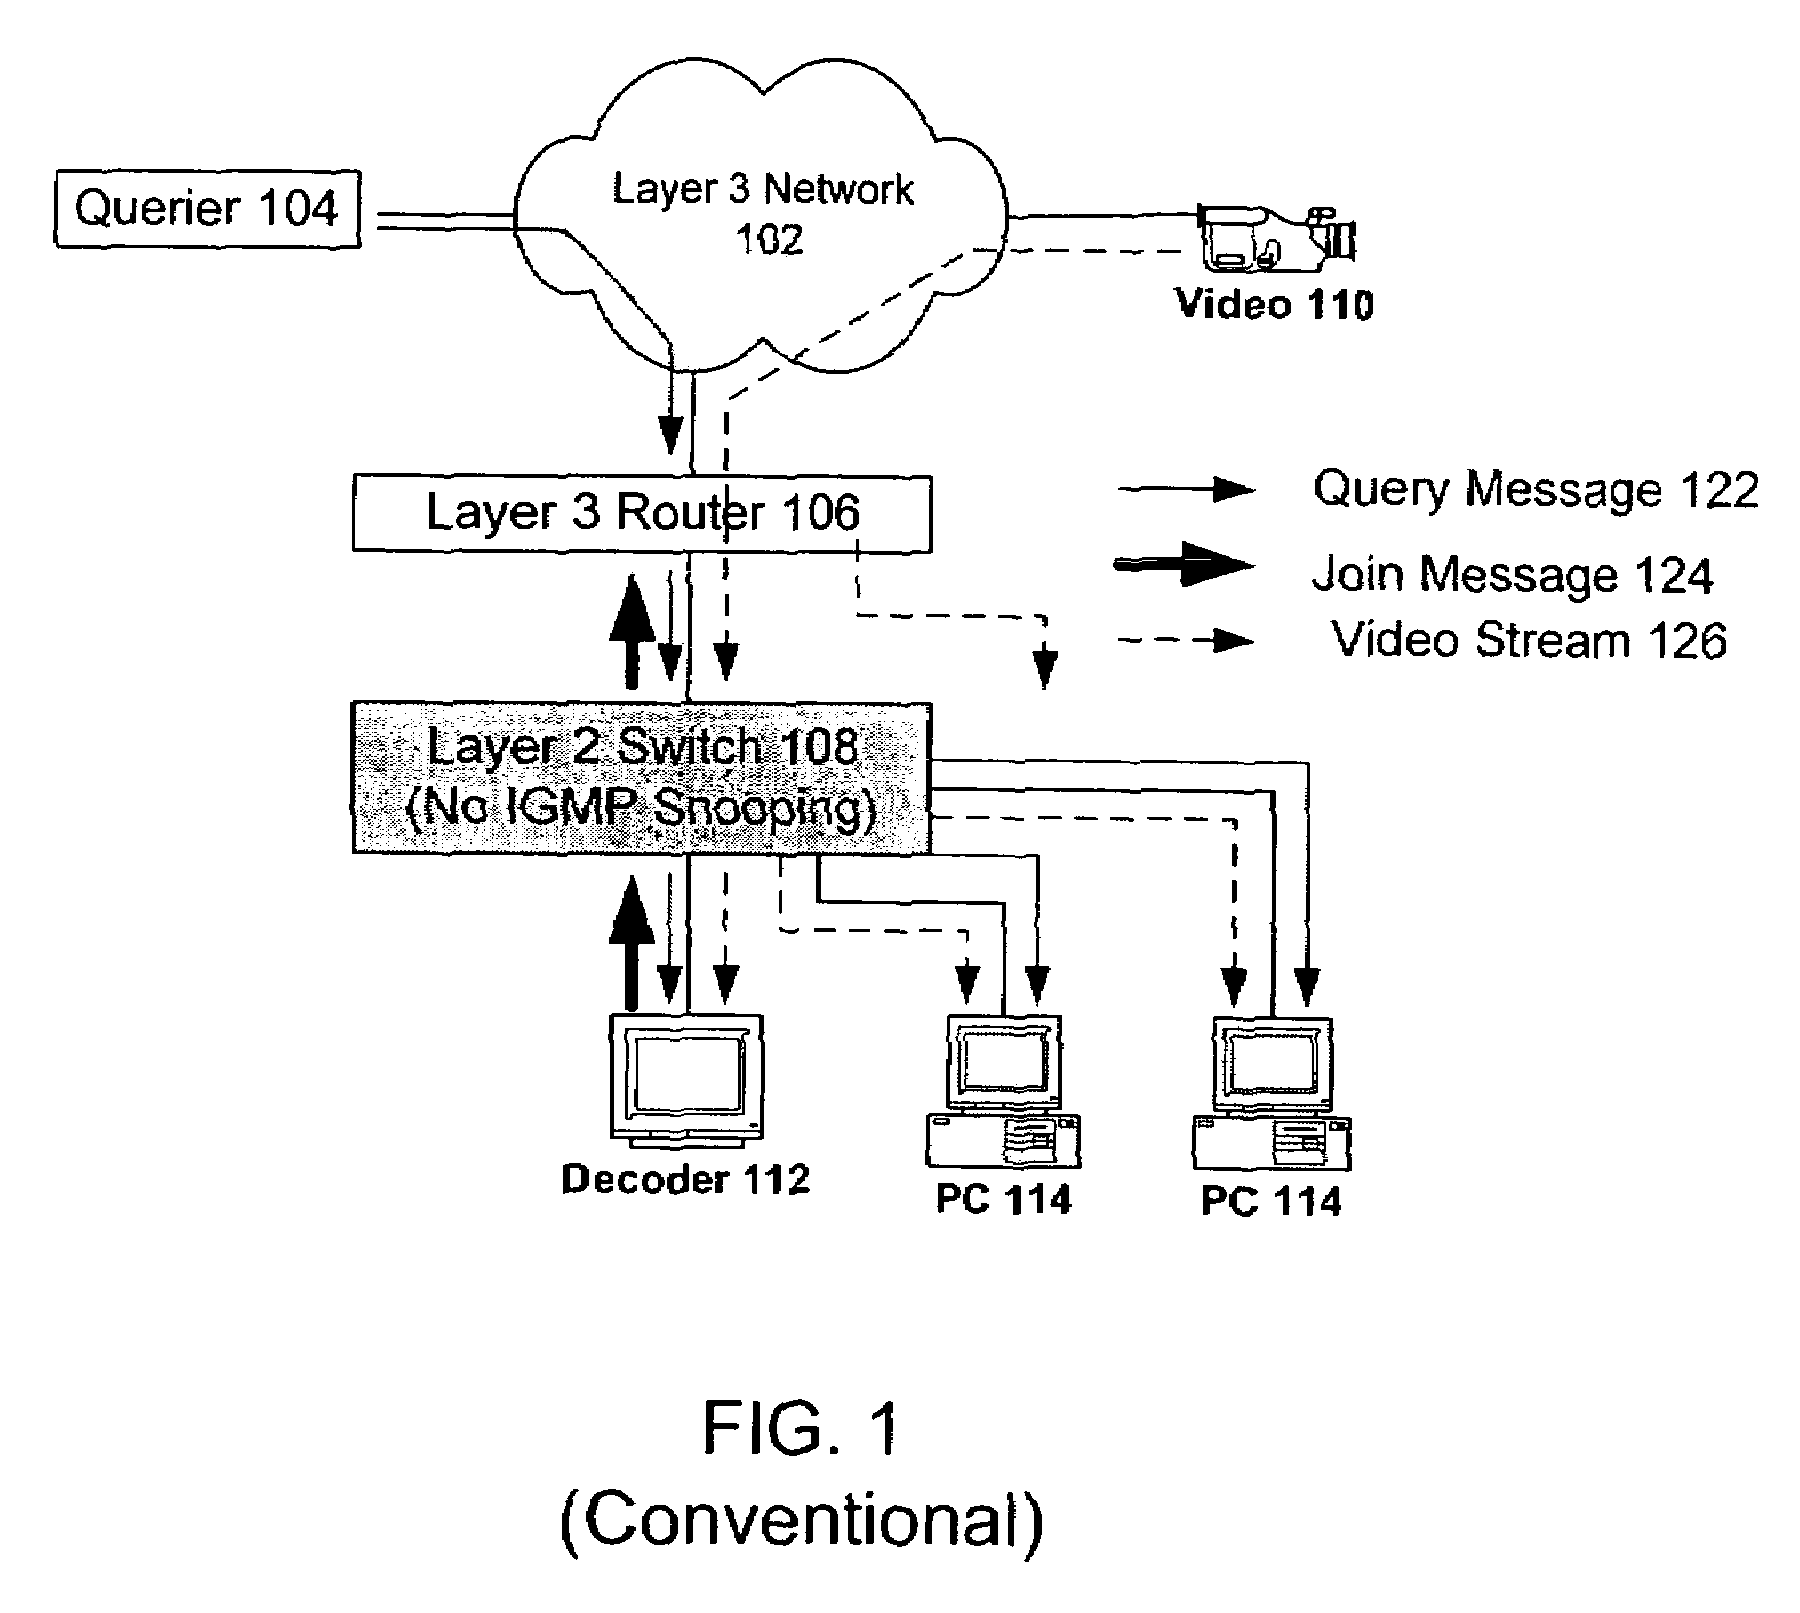 Method and apparatus for layer 2 multicast traffic management